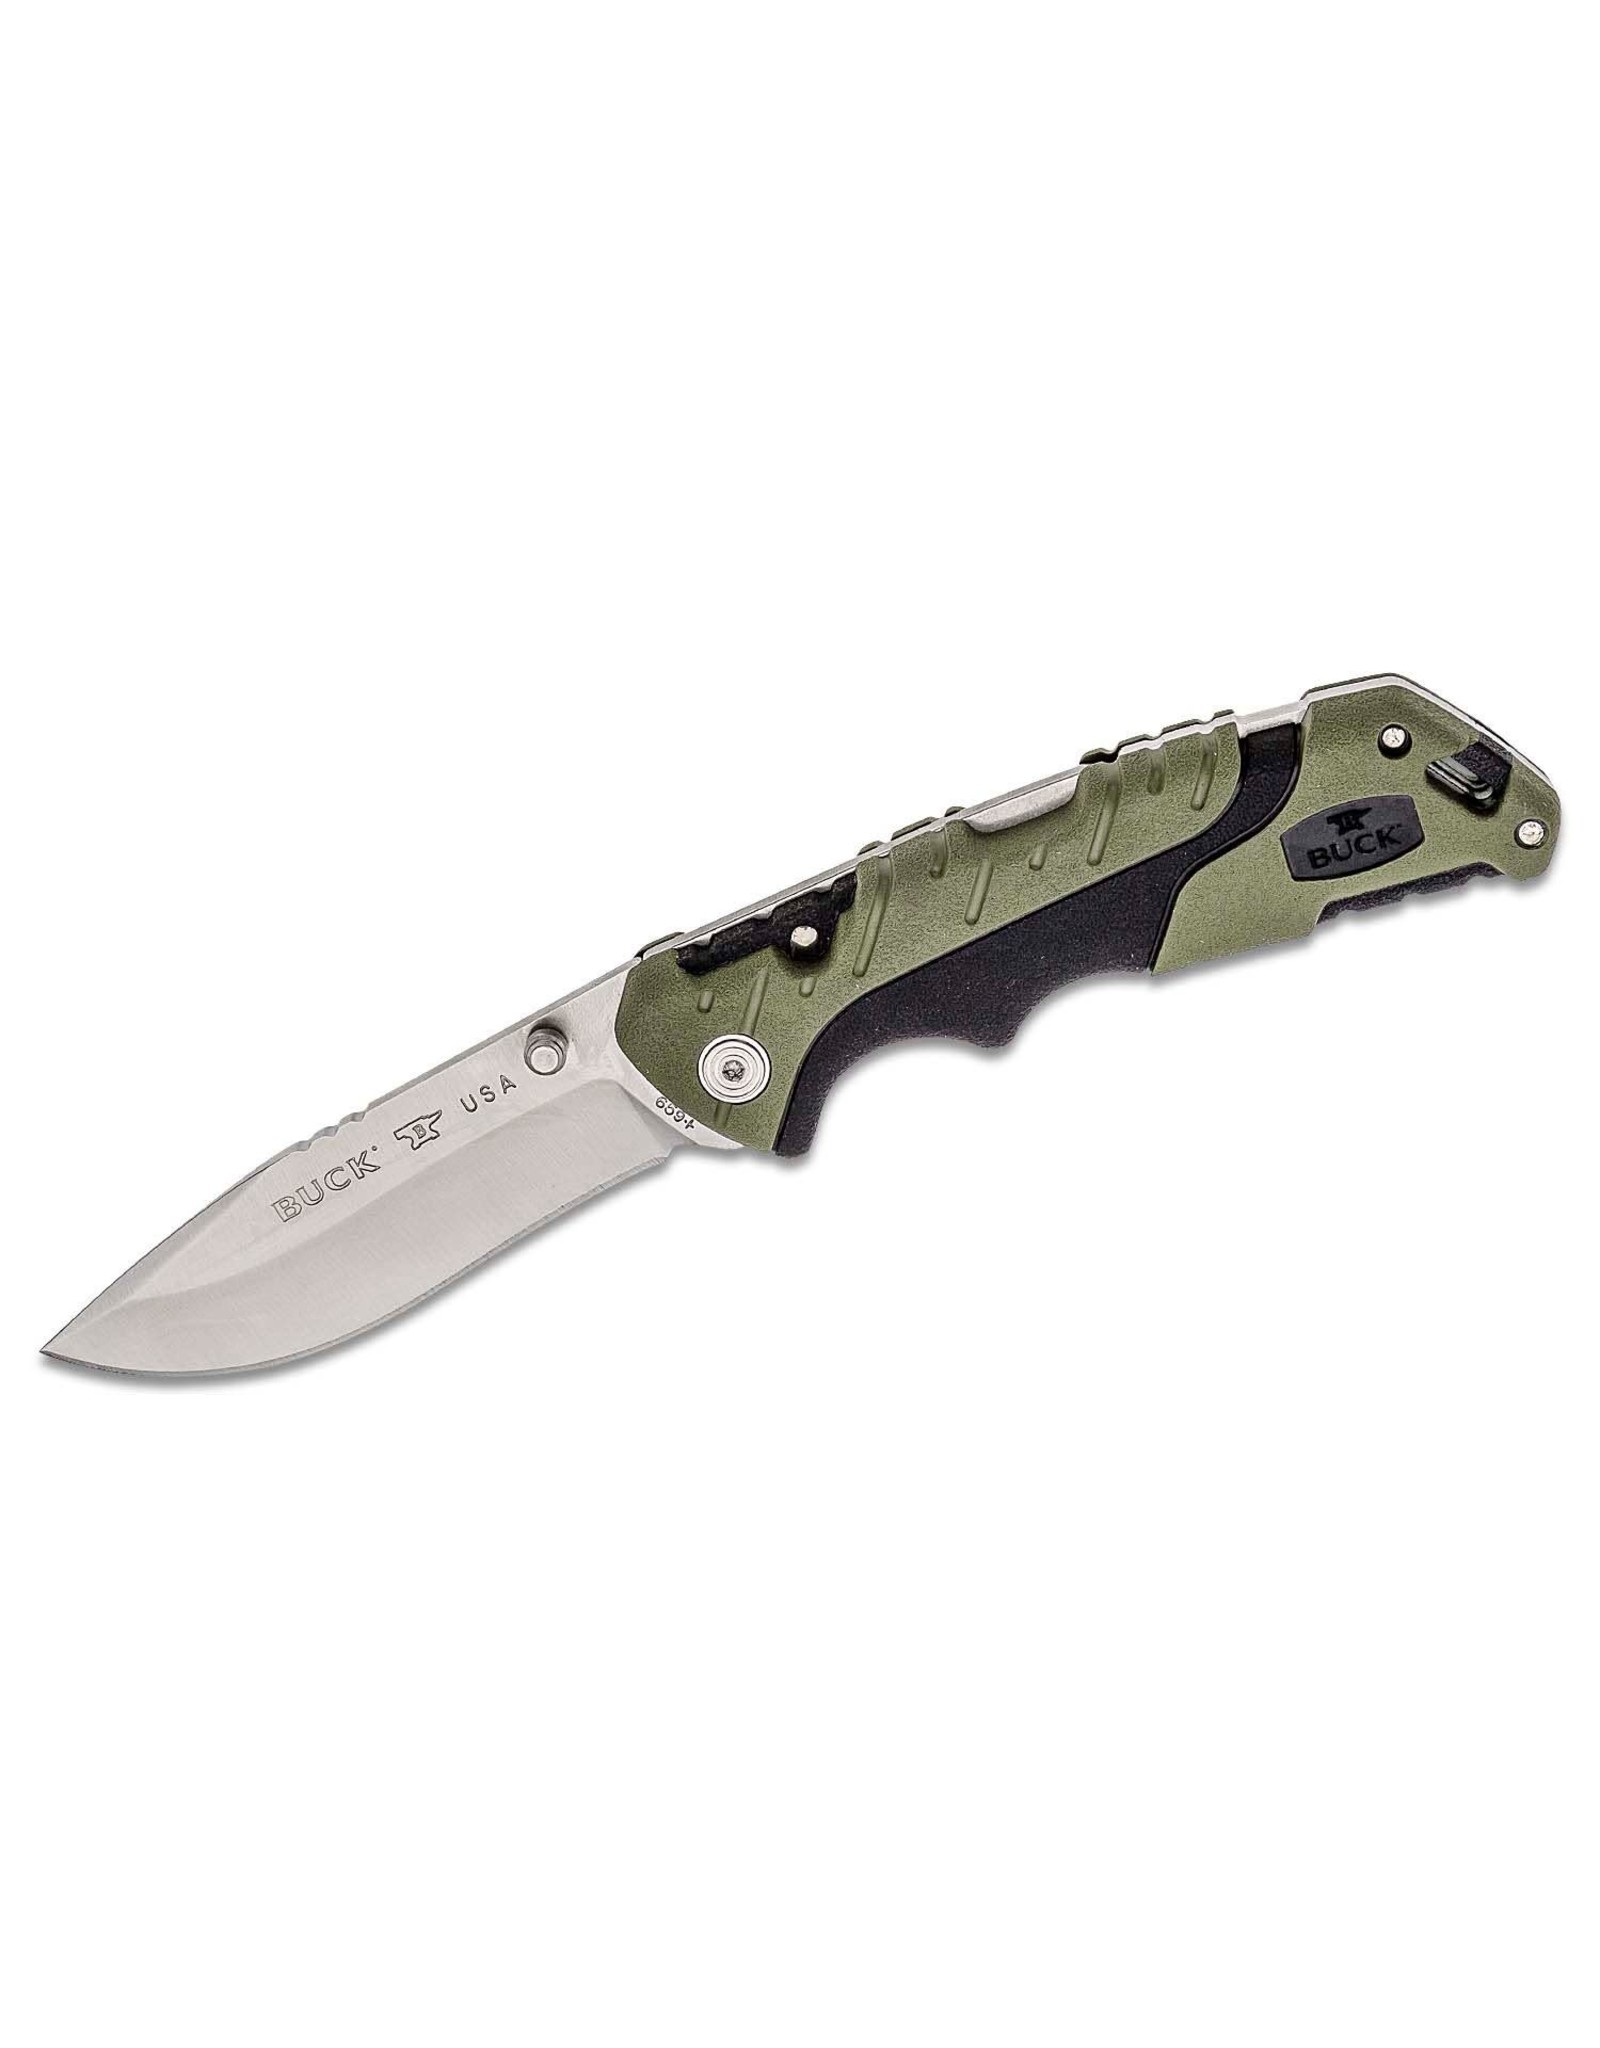 Buck Knives Buck 659 Large Pursuit Folding Knife 3.625" 420HC Stainless Steel Drop Point, Green GRN and Rubber Handles, Nylon Sheath - 11892